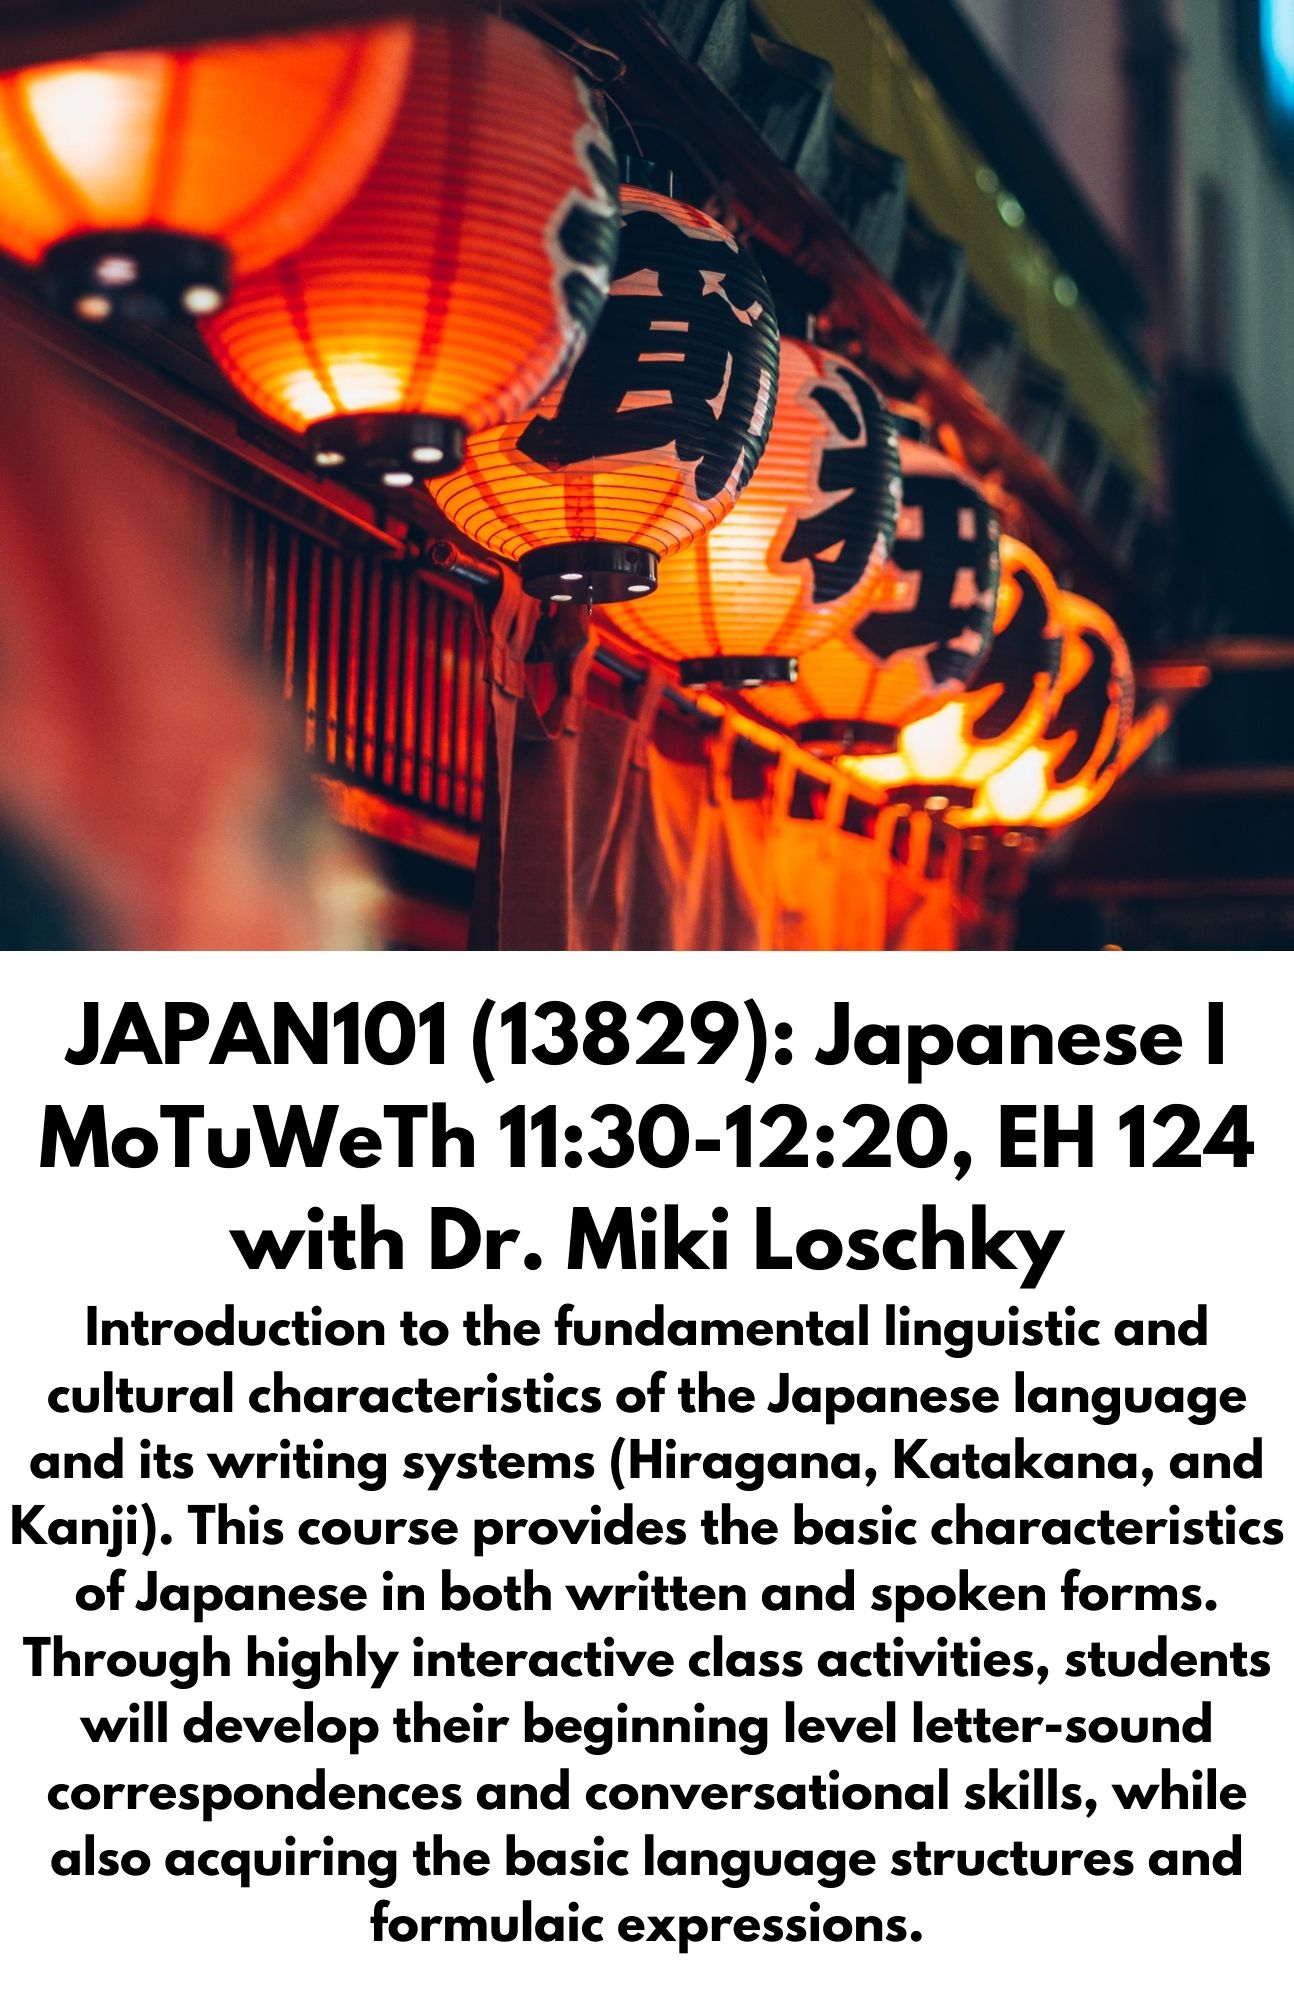 JAPAN101 (13829): Japanese I MoTuWeTh 11:30-12:20, EH 124 with Dr. Miki Loschky Introduction to the fundamental linguistic and cultural characteristics of the Japanese language and its writing systems (Hiragana, Katakana, and Kanji). This course provides the basic characteristics of Japanese in both written and spoken forms. Through highly interactive class activities, students will develop their beginning level letter-sound correspondences and conversational skills, while also acquiring the basic language structures and formulaic expressions.